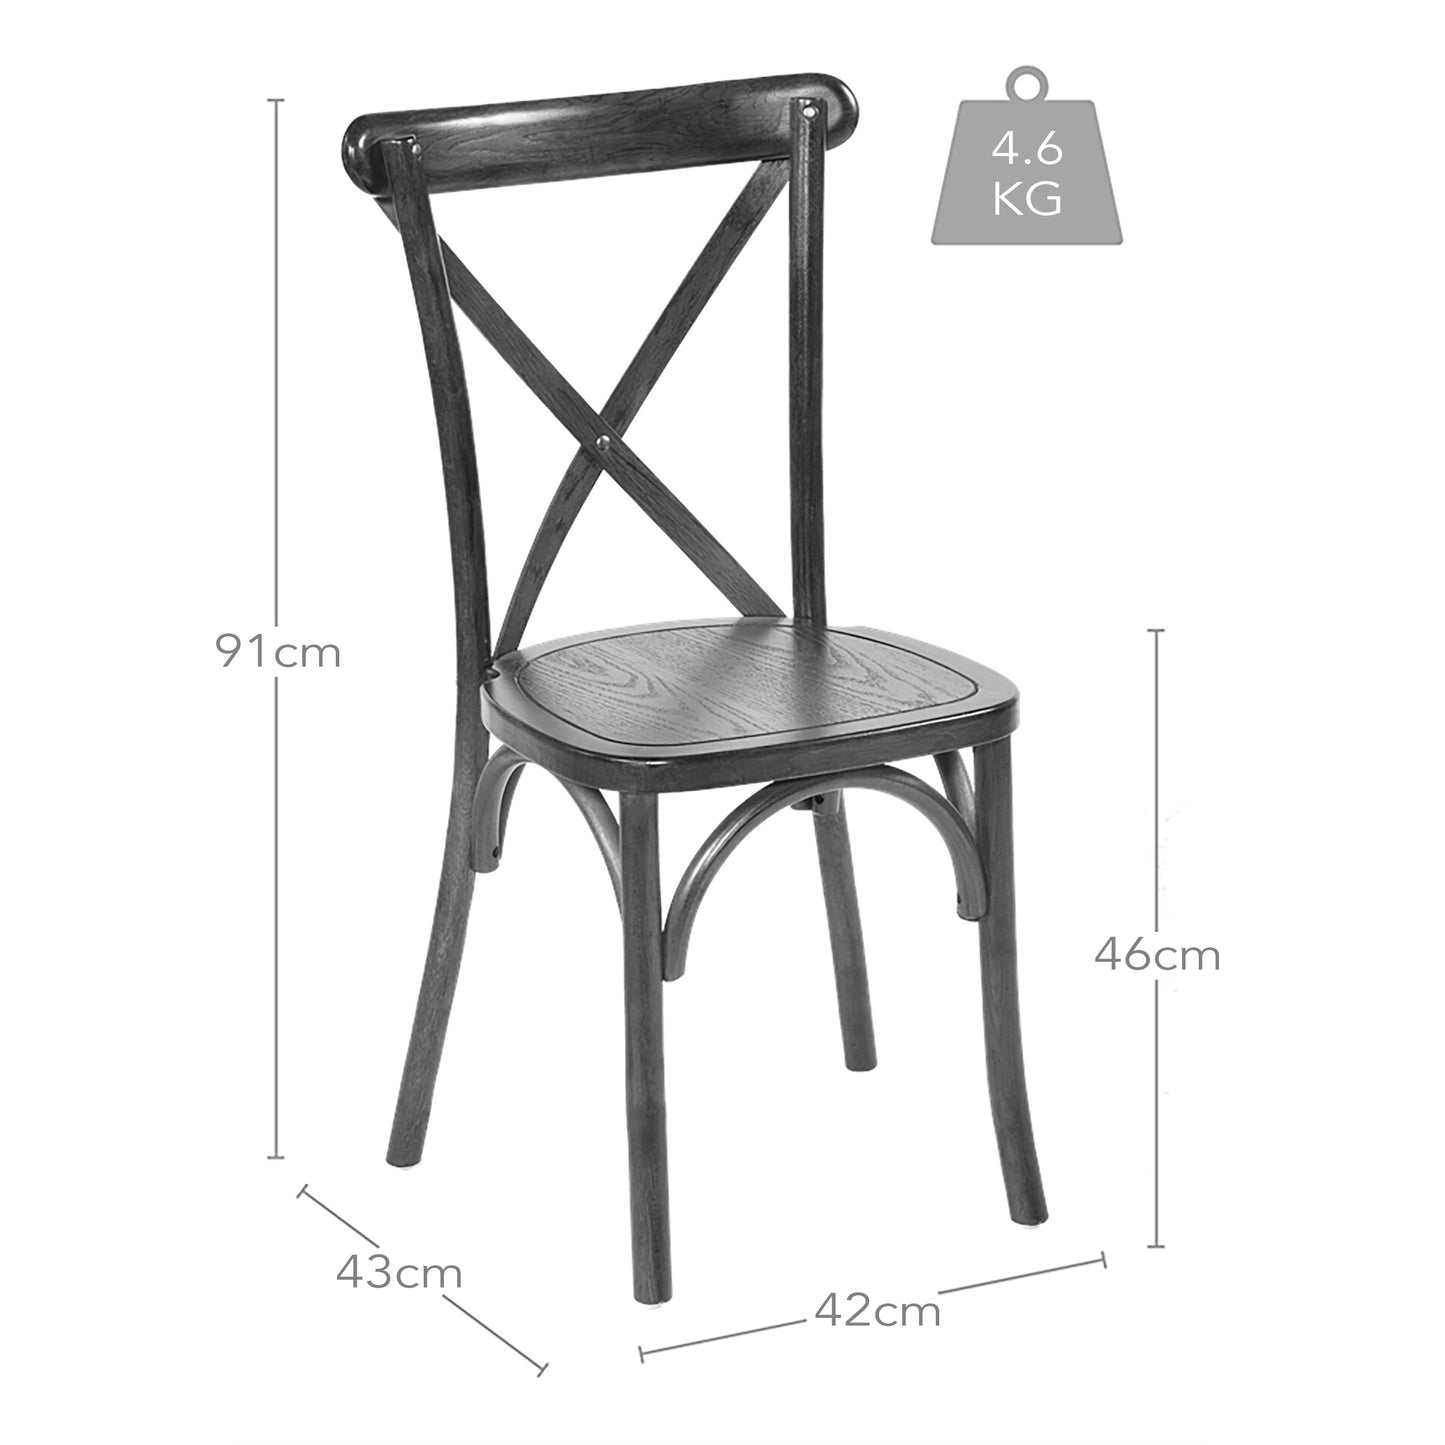 3. York Crossback Stacking Chair